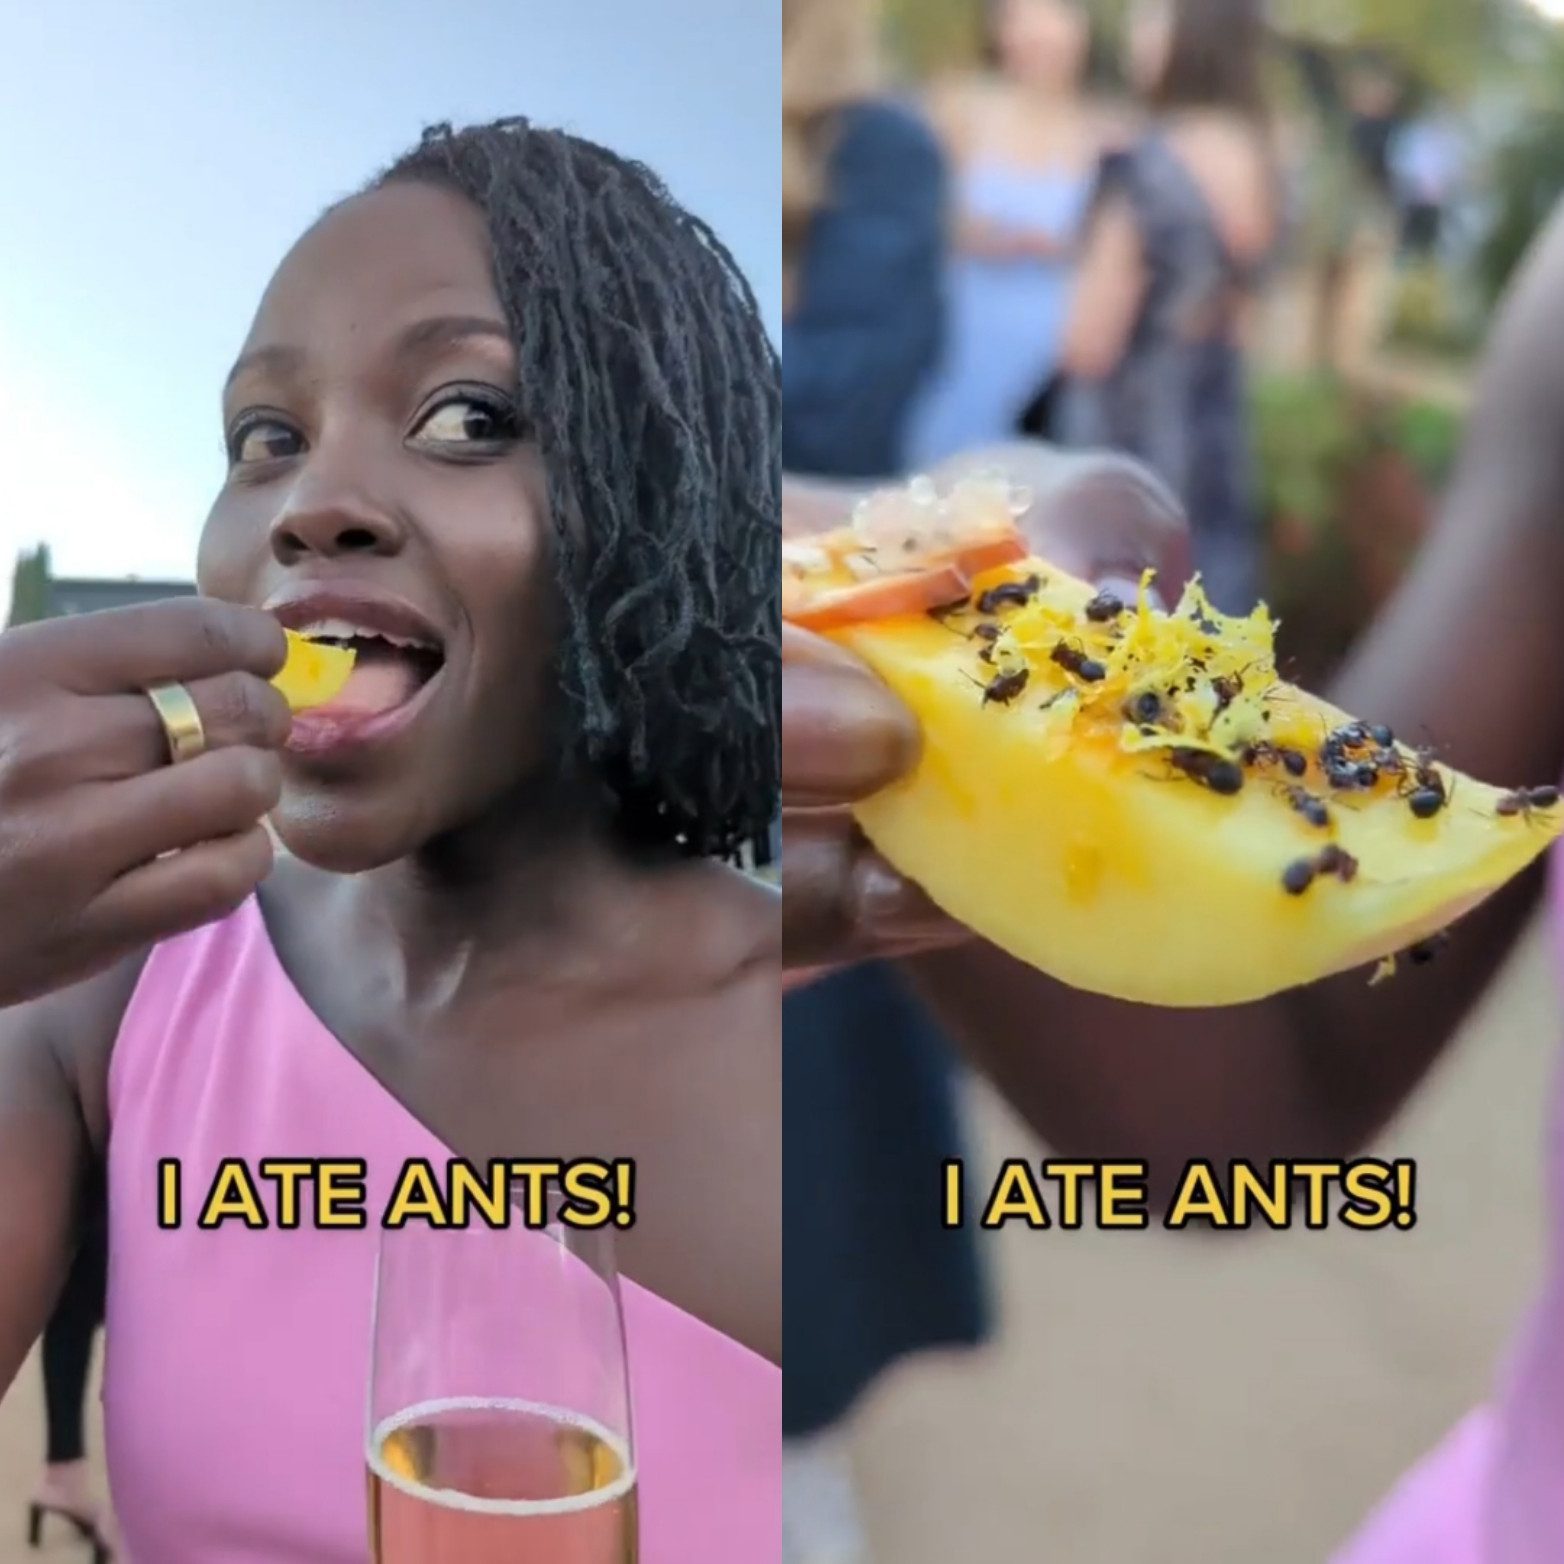 Lupita Nyong'o eats soldier ants at an event (video)